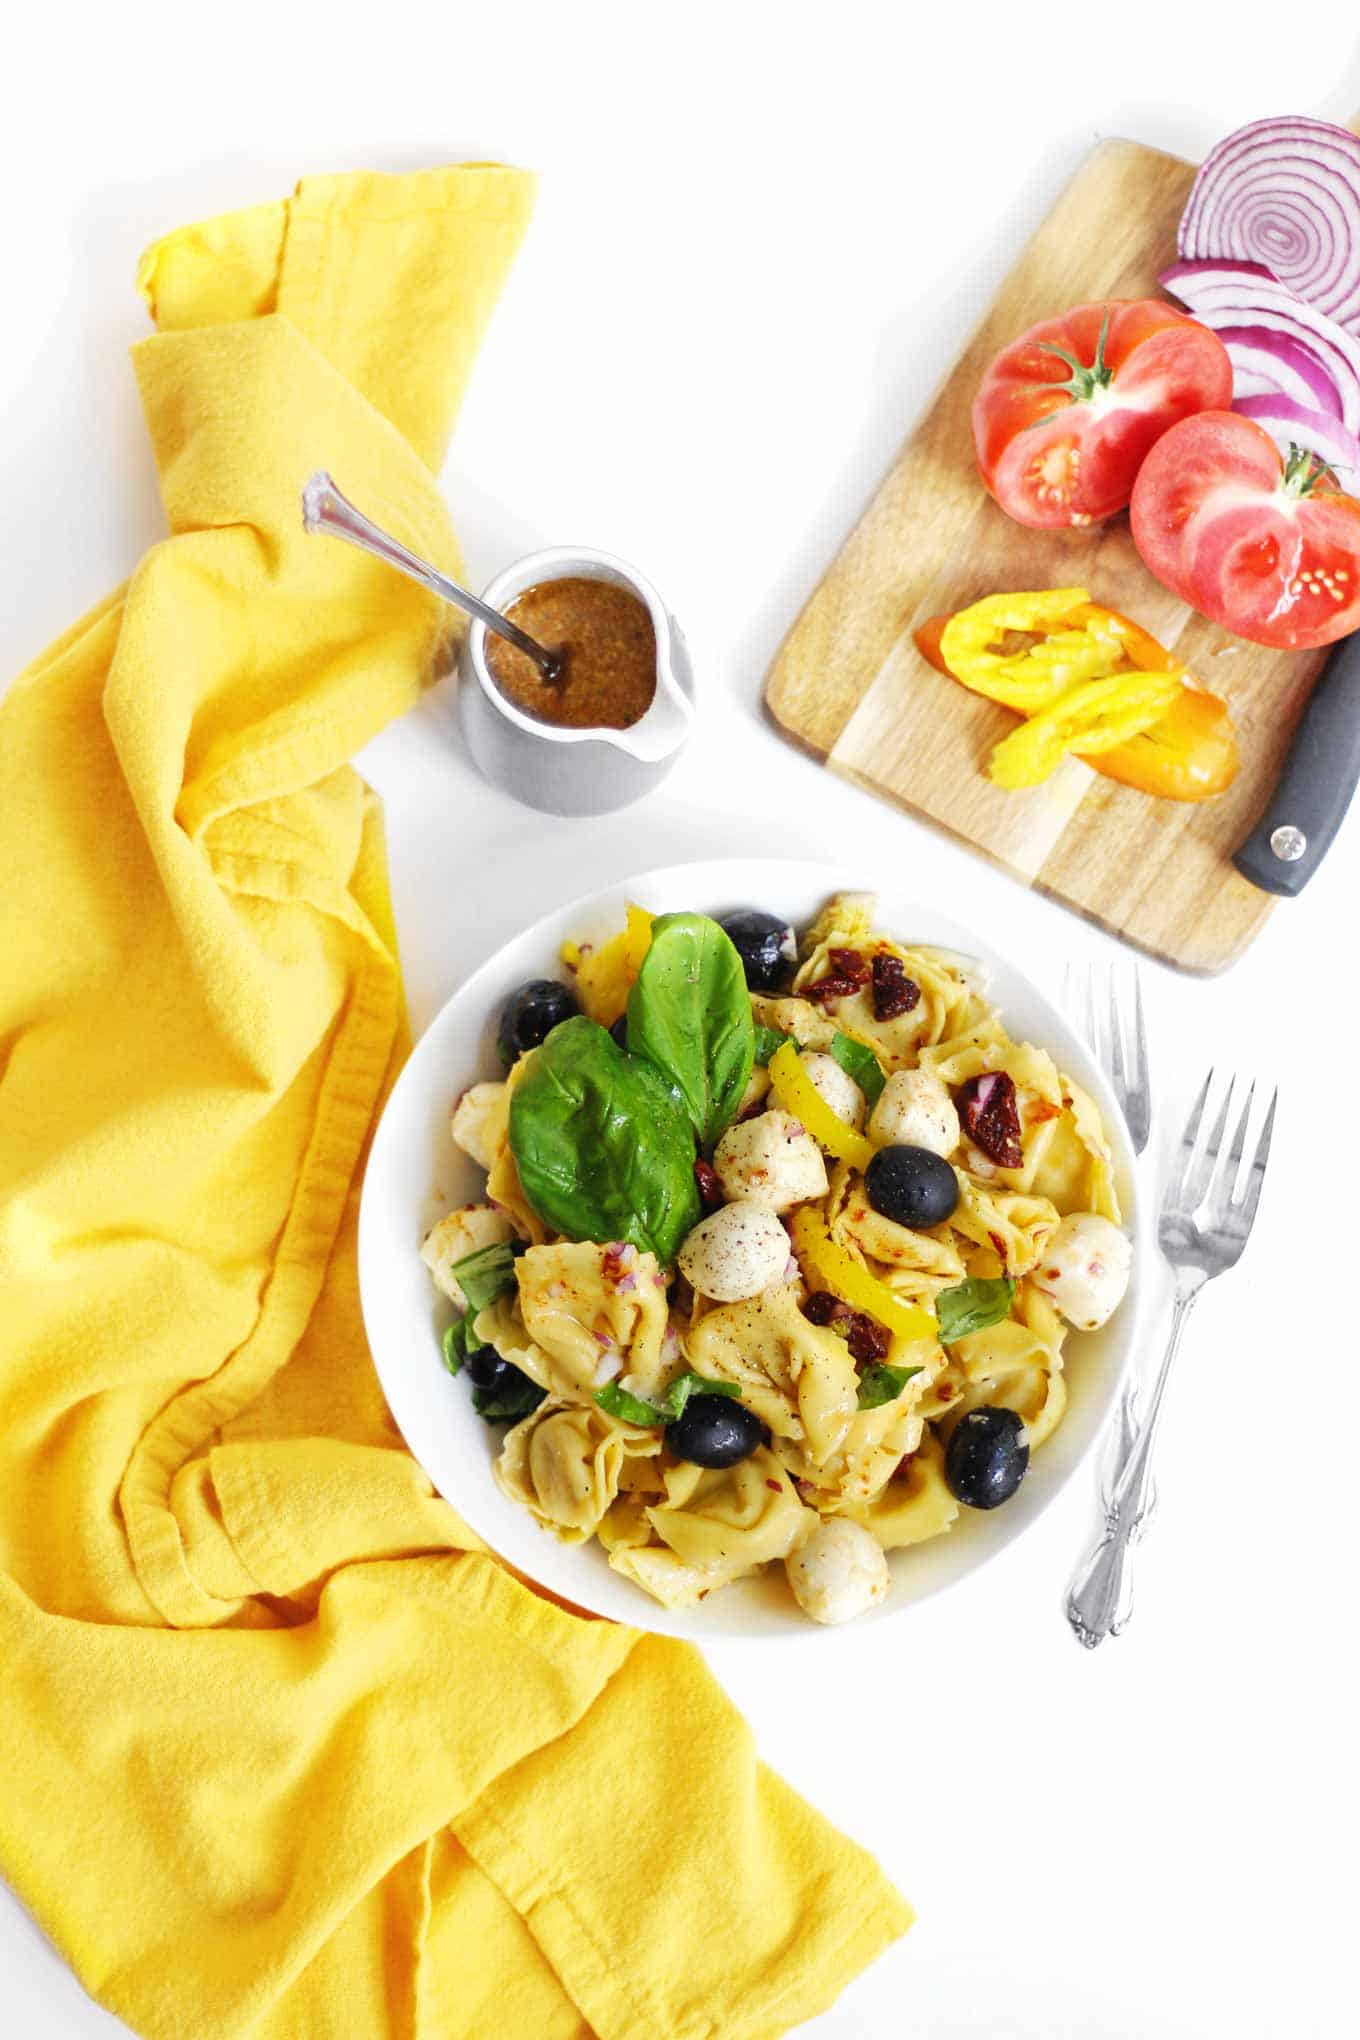 A picture of a bowl of vegetarian Italian tortellini pasta salad next to two forks and a yellow cloth napkin.